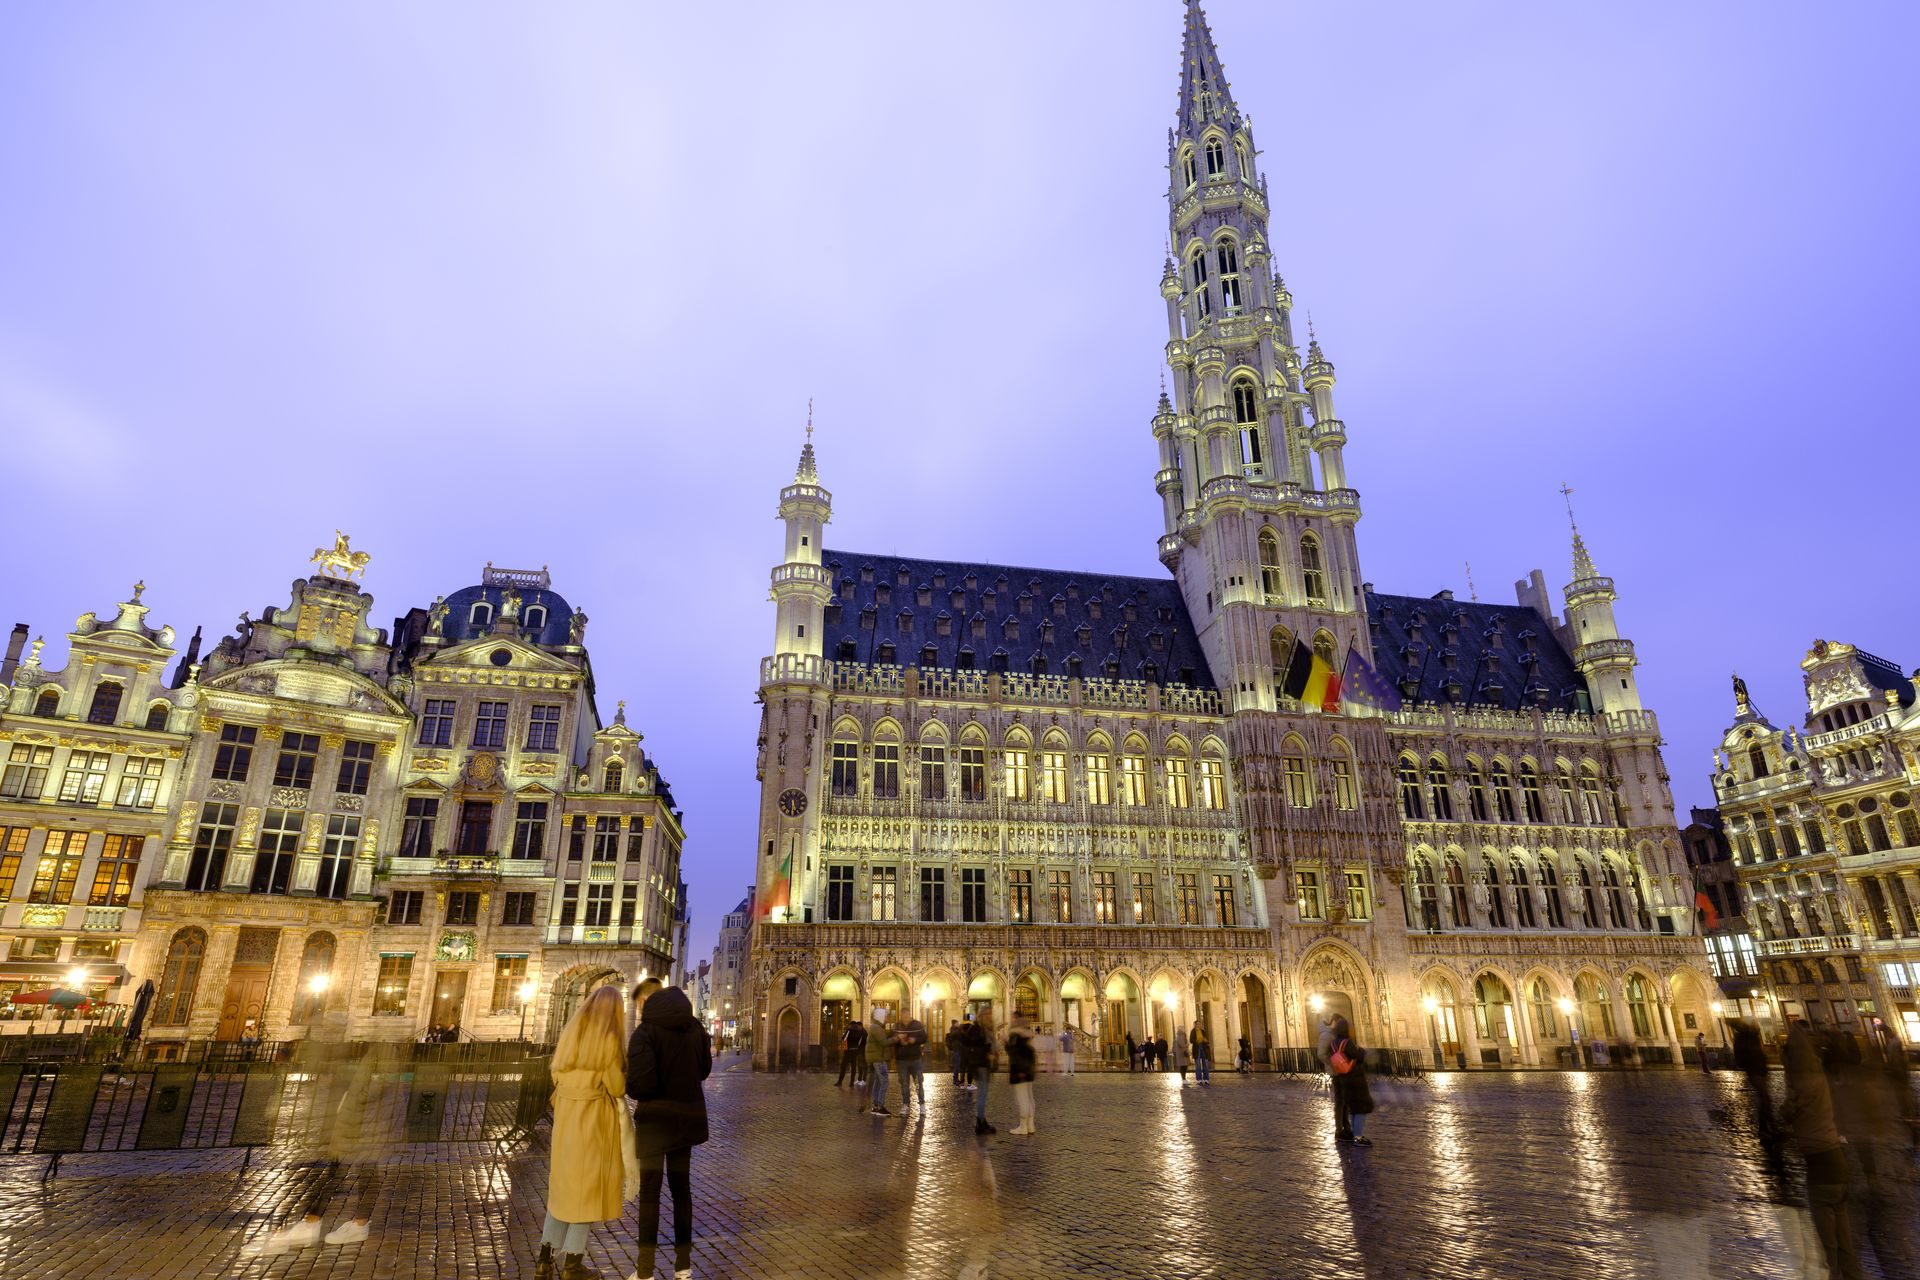 <p>In the heart of Europe, Belgium is known for chocolate, comics, and its bustling capital, Brussels. But what else do you know about this country full of surprises? Discover 20 unusual facts about Belgium here!</p>